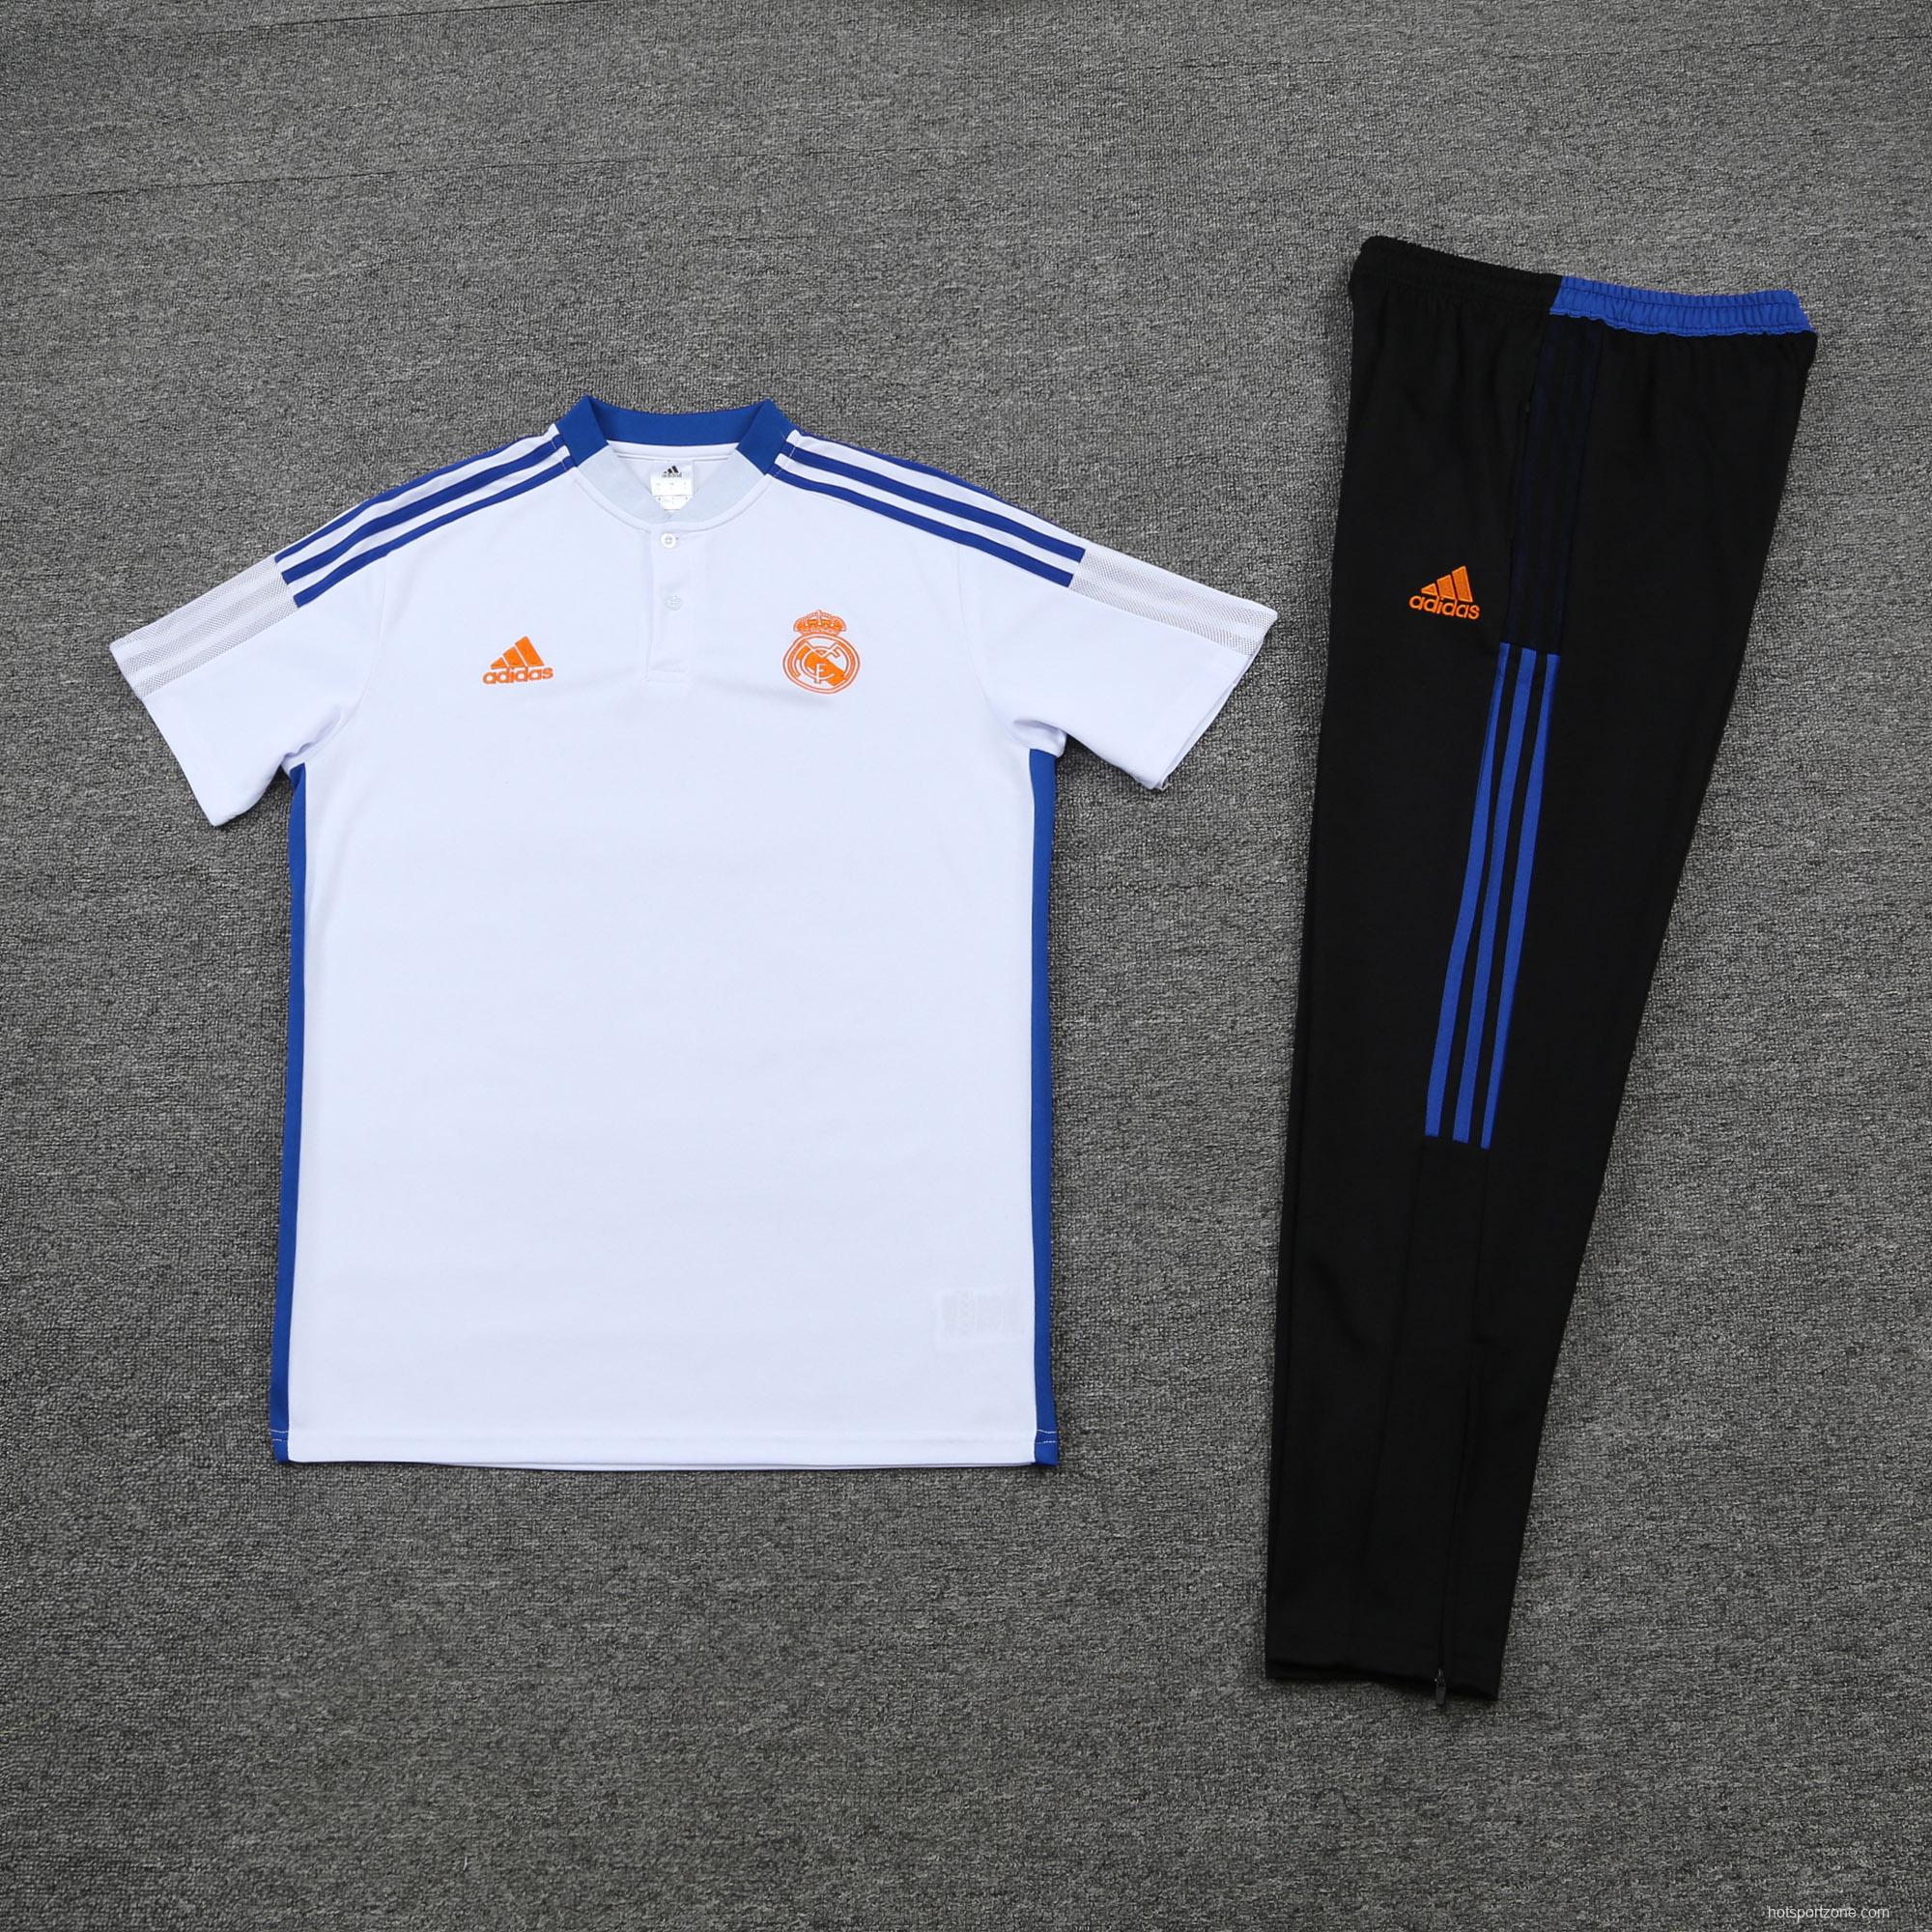 Real Madrid POLO kit White (not supported to be sold separately)